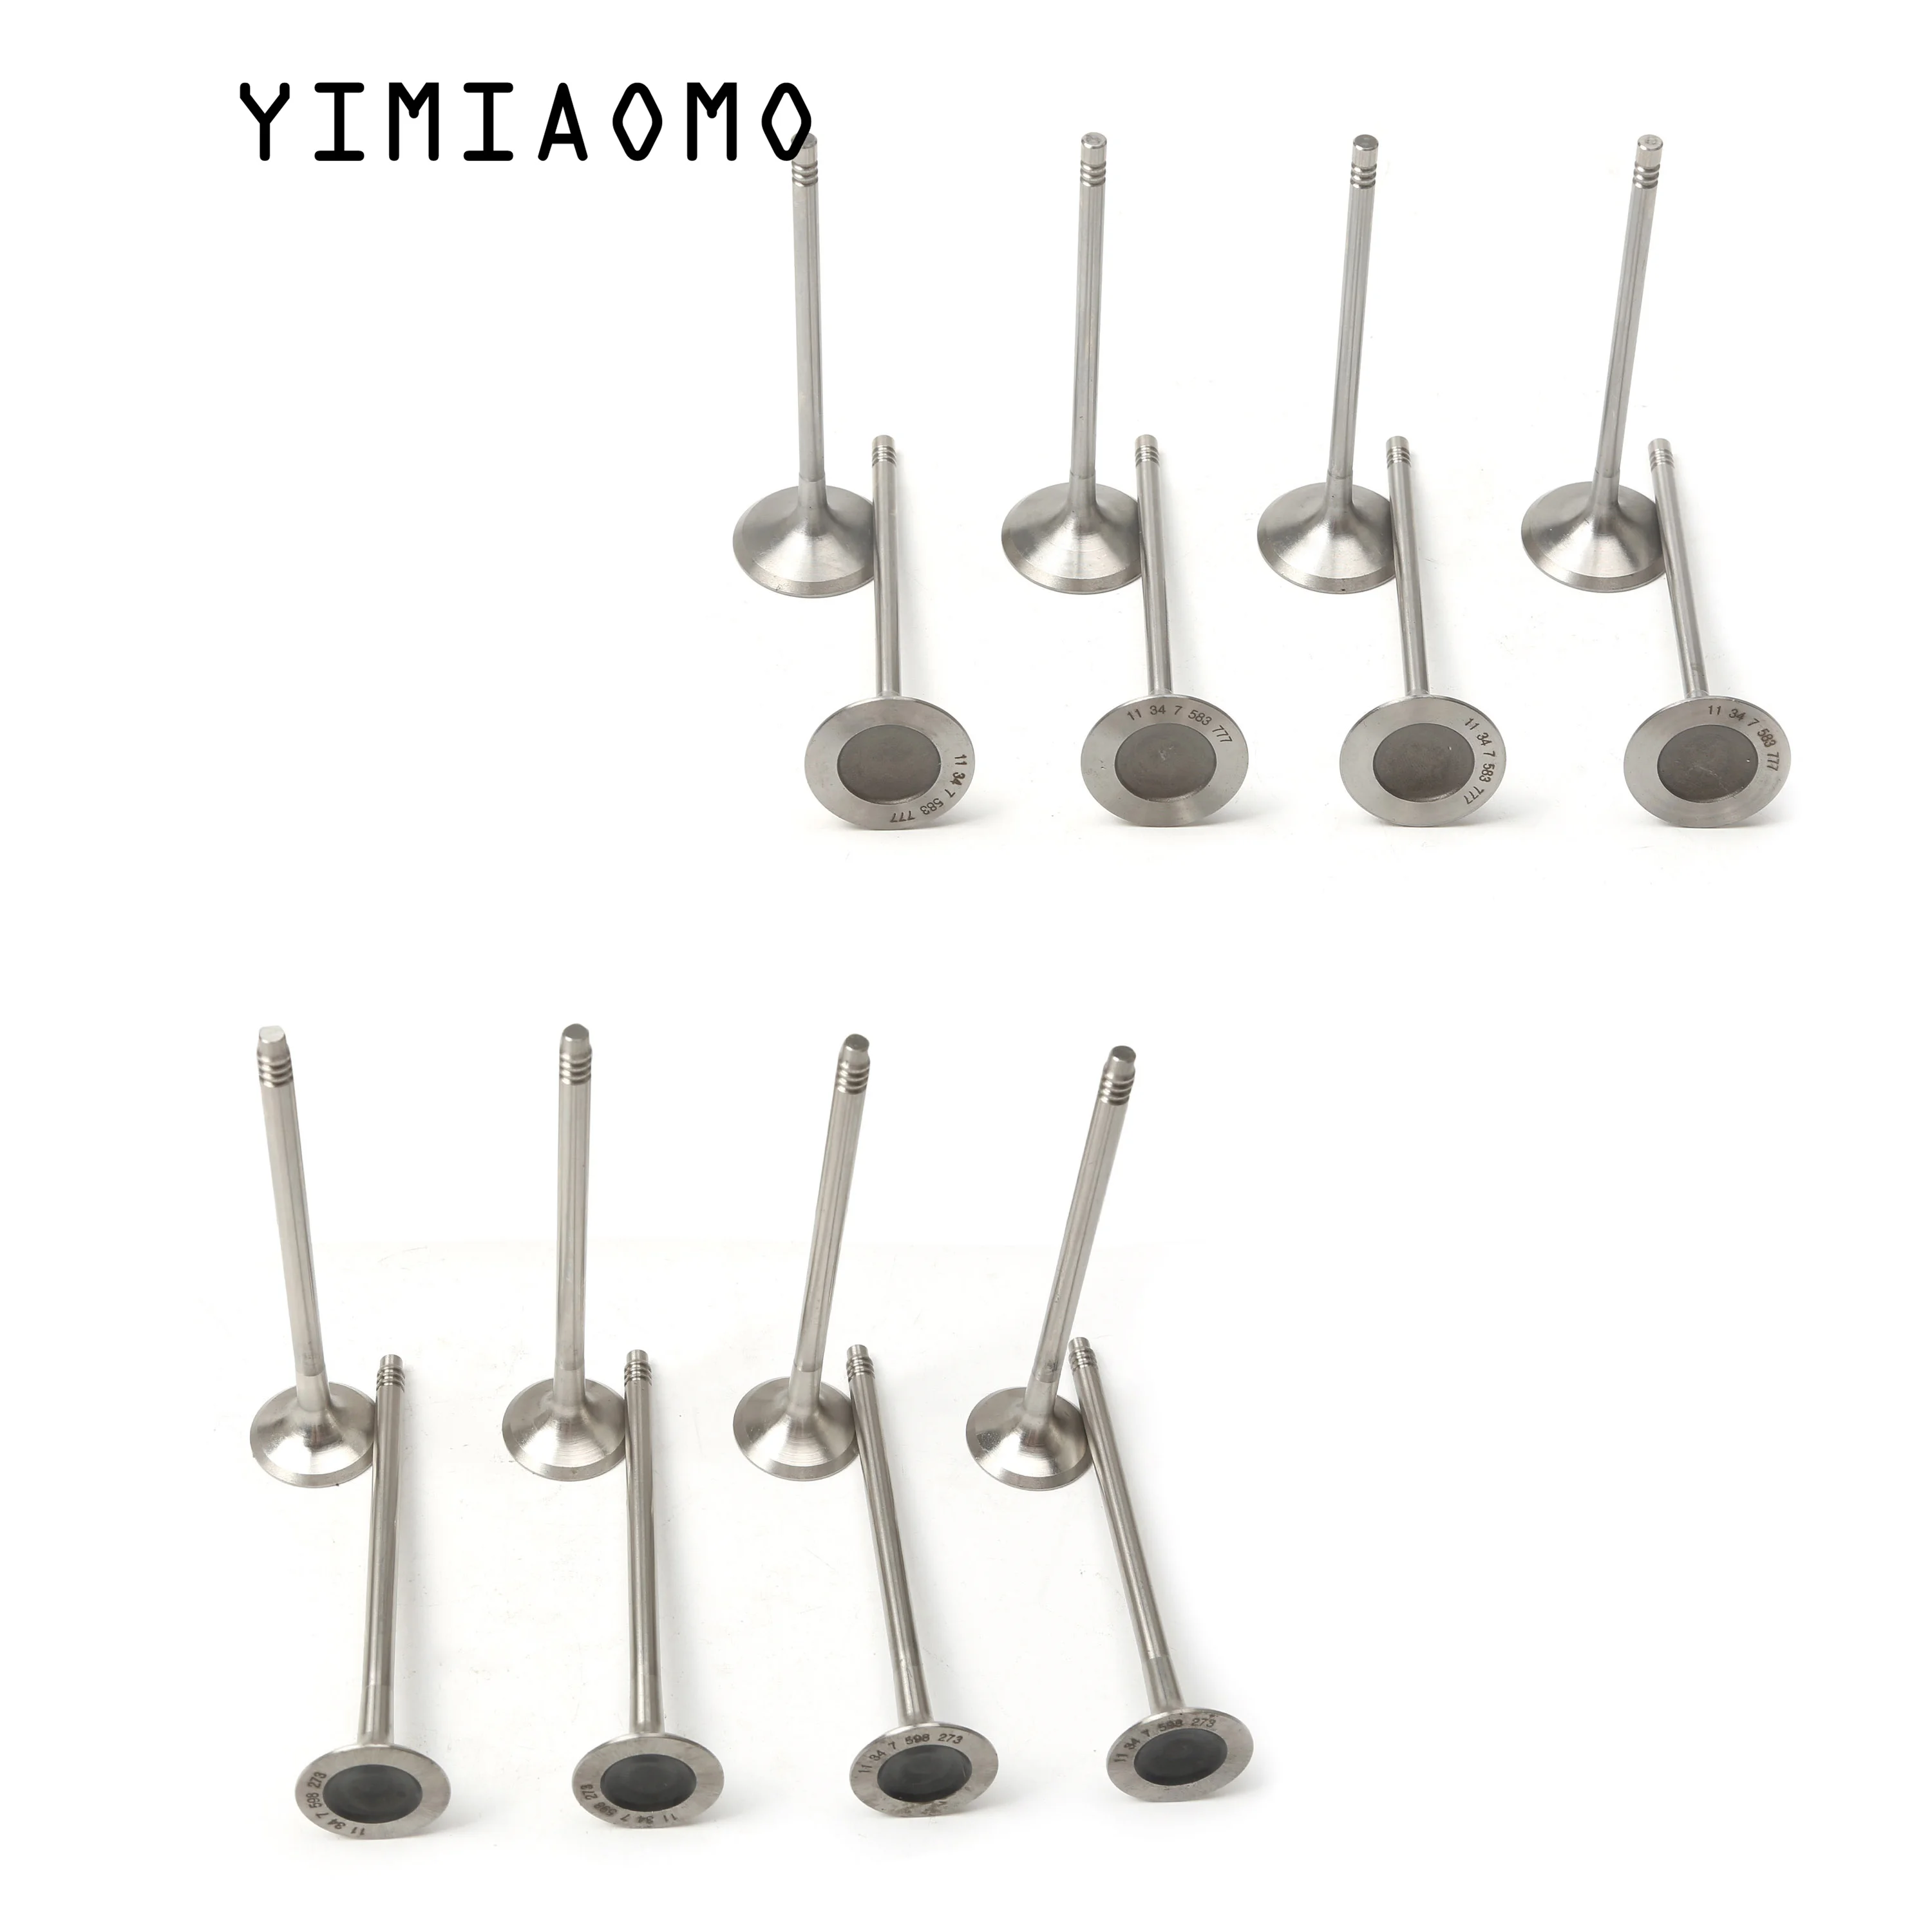 11347598273 Intake And Exhaust Valve Set For BMW F20 2015-2016 F31 F36 F10 X1 E84 2011-2015 X3 X4 X5 Z4 Roadster E89 11347583779 images - 6